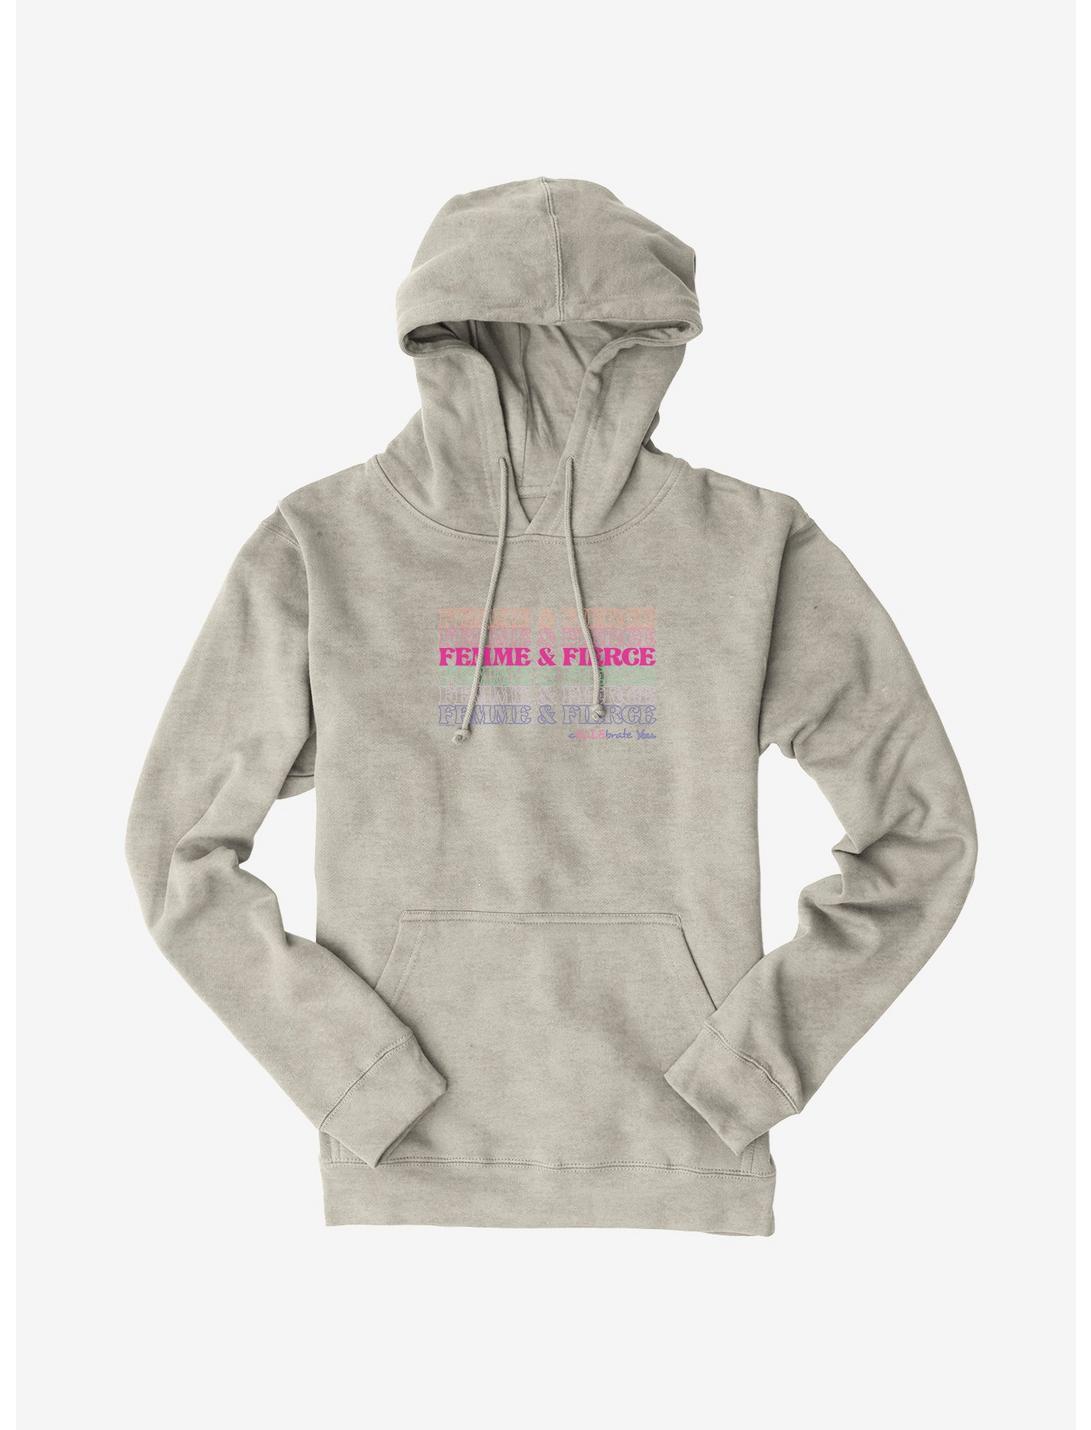 Legally Blonde Femme And Fierce Stack Hoodie, OATMEAL HEATHER, hi-res